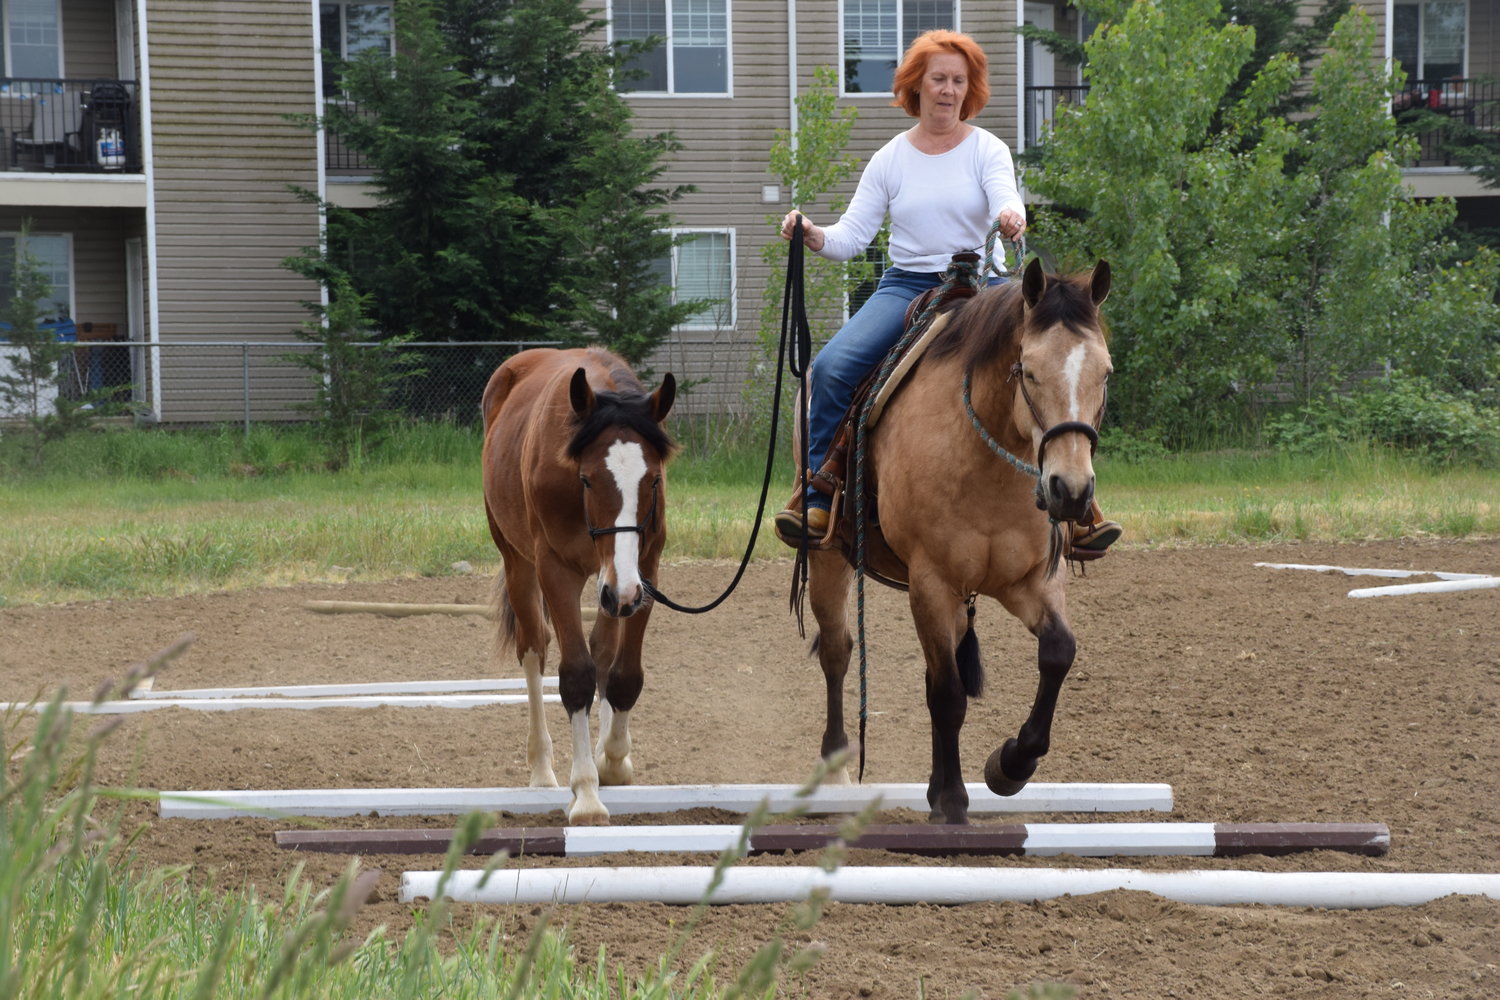 Jan Bennett, riding Chip, ponies her daughter’s colt, Boots, on part of a trail riding course at the Clark County Saddle Club May 22.